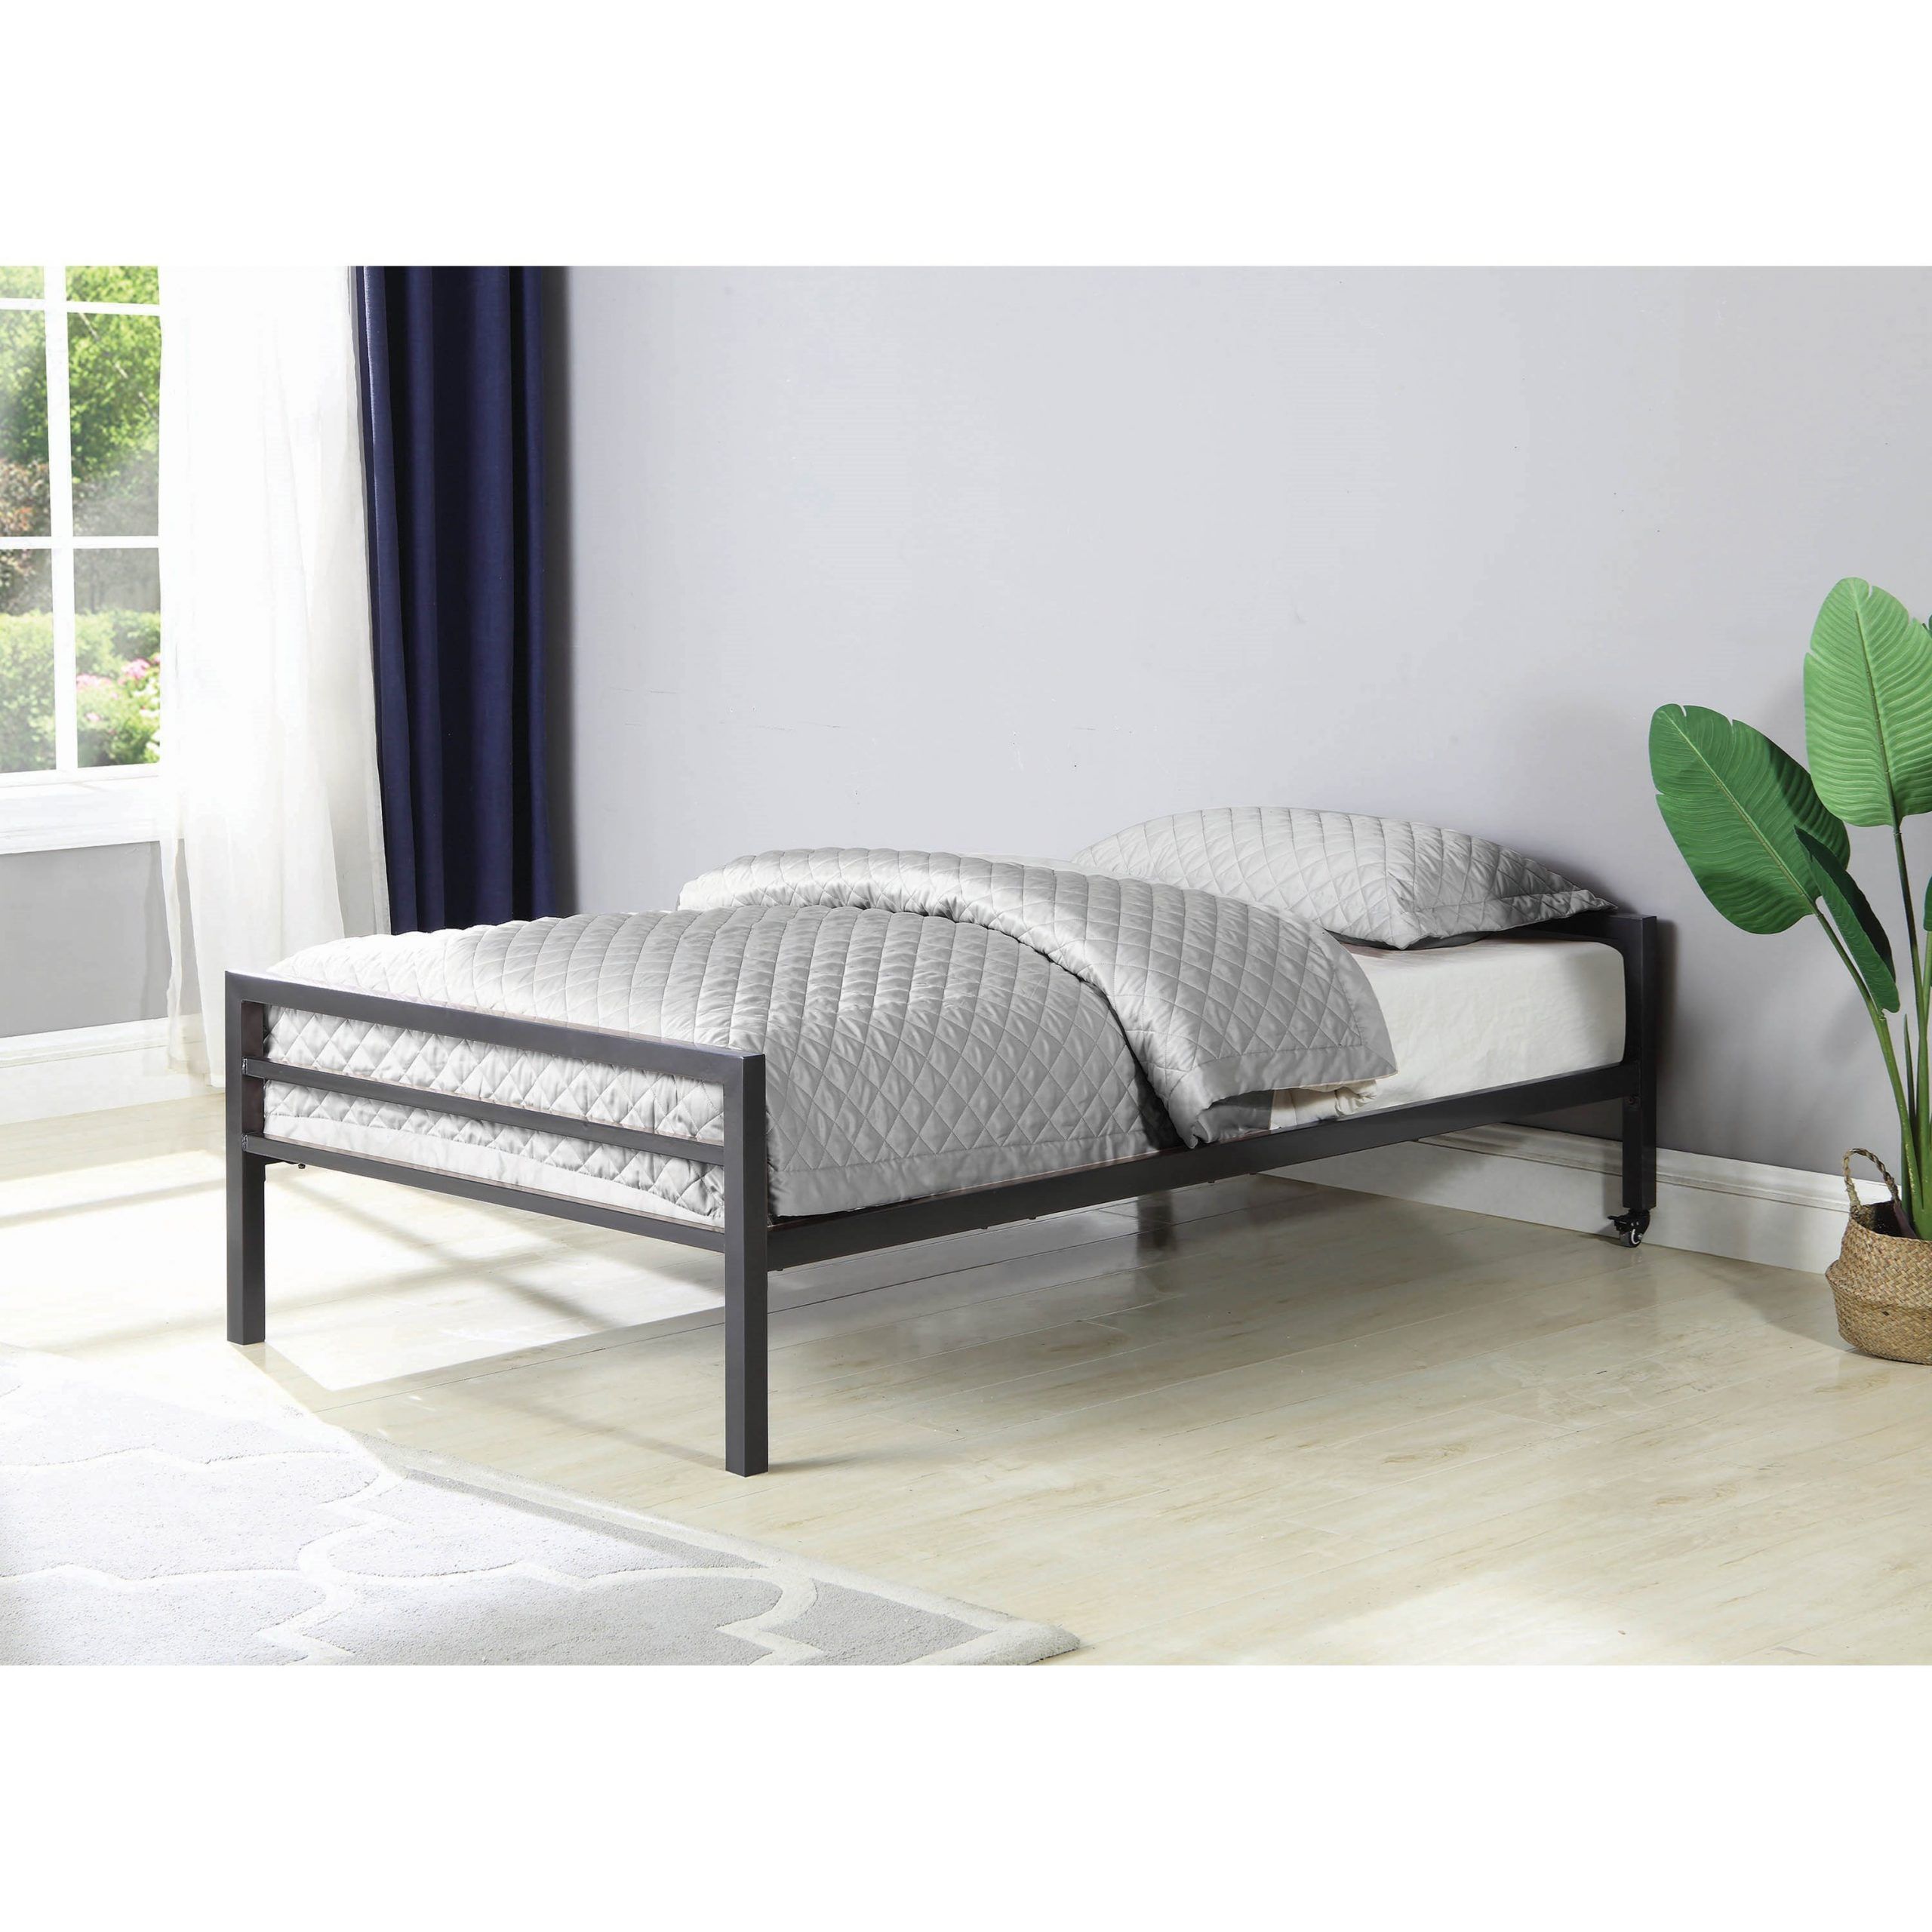 Coaster Hadley Metal Twin Bed | A1 Furniture & Mattress In Hadley Small Space Sectional Futon Sofas (View 12 of 15)